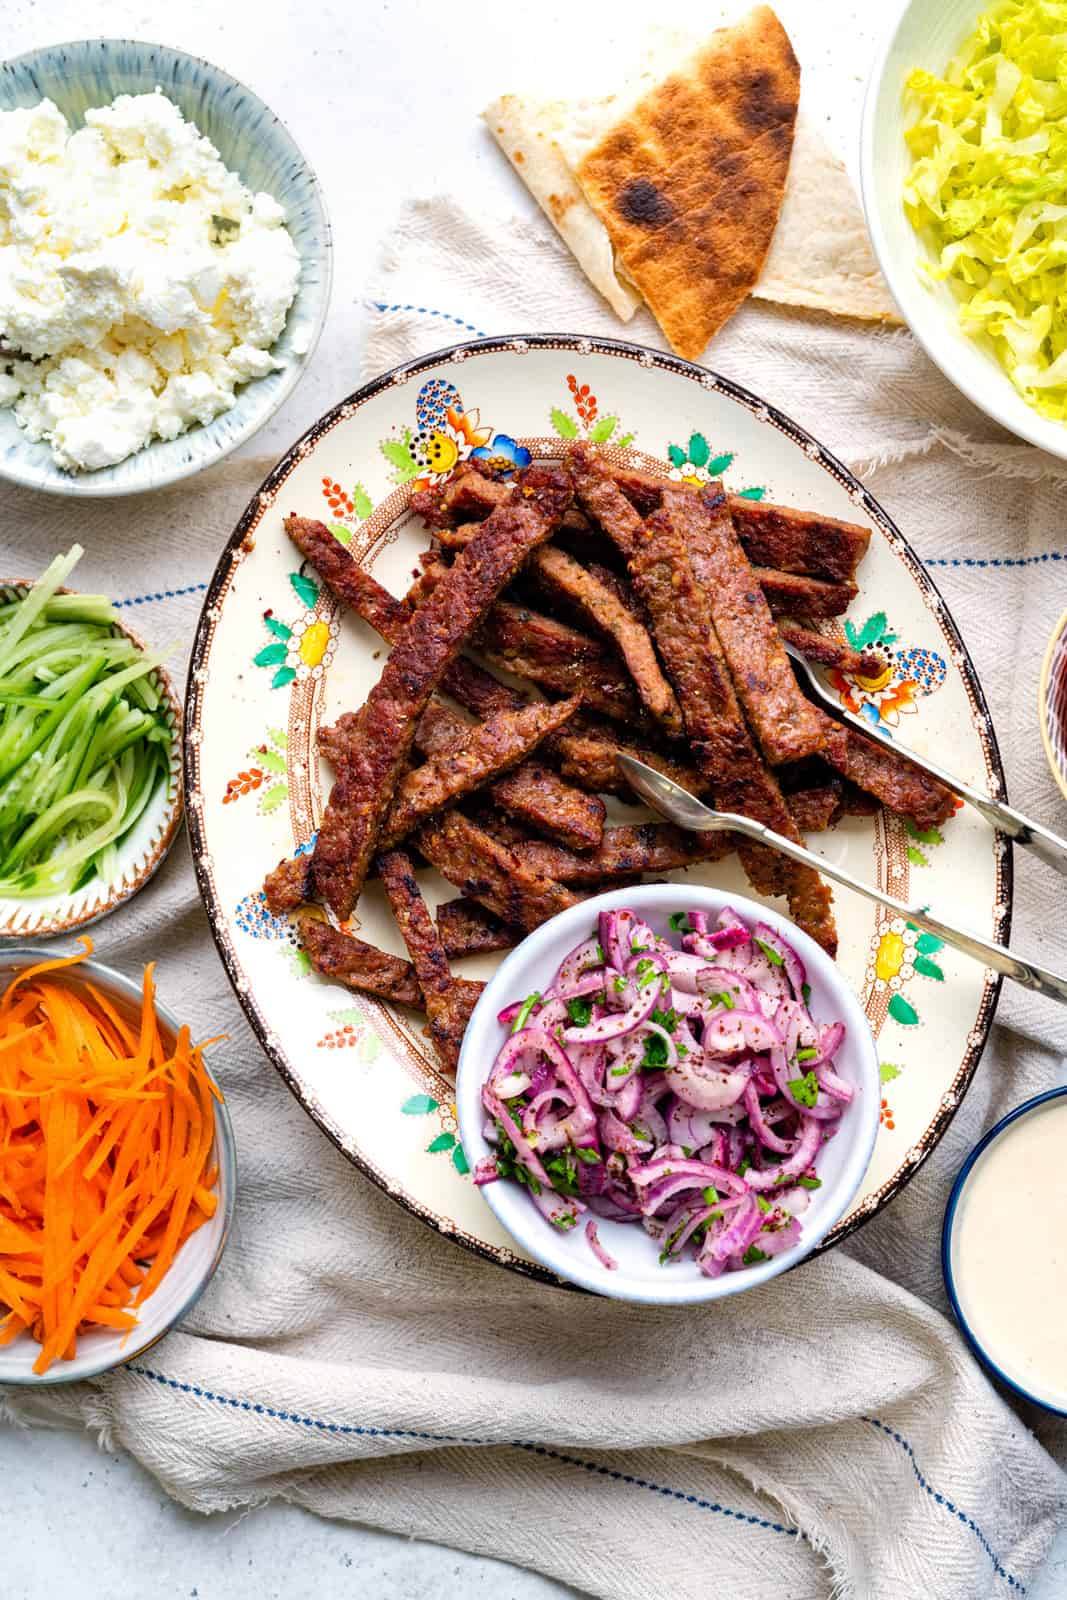 Homemade Lamb Doner meat cut into thin strips on a platter with sumac onions, lettuce and other kebab fillings